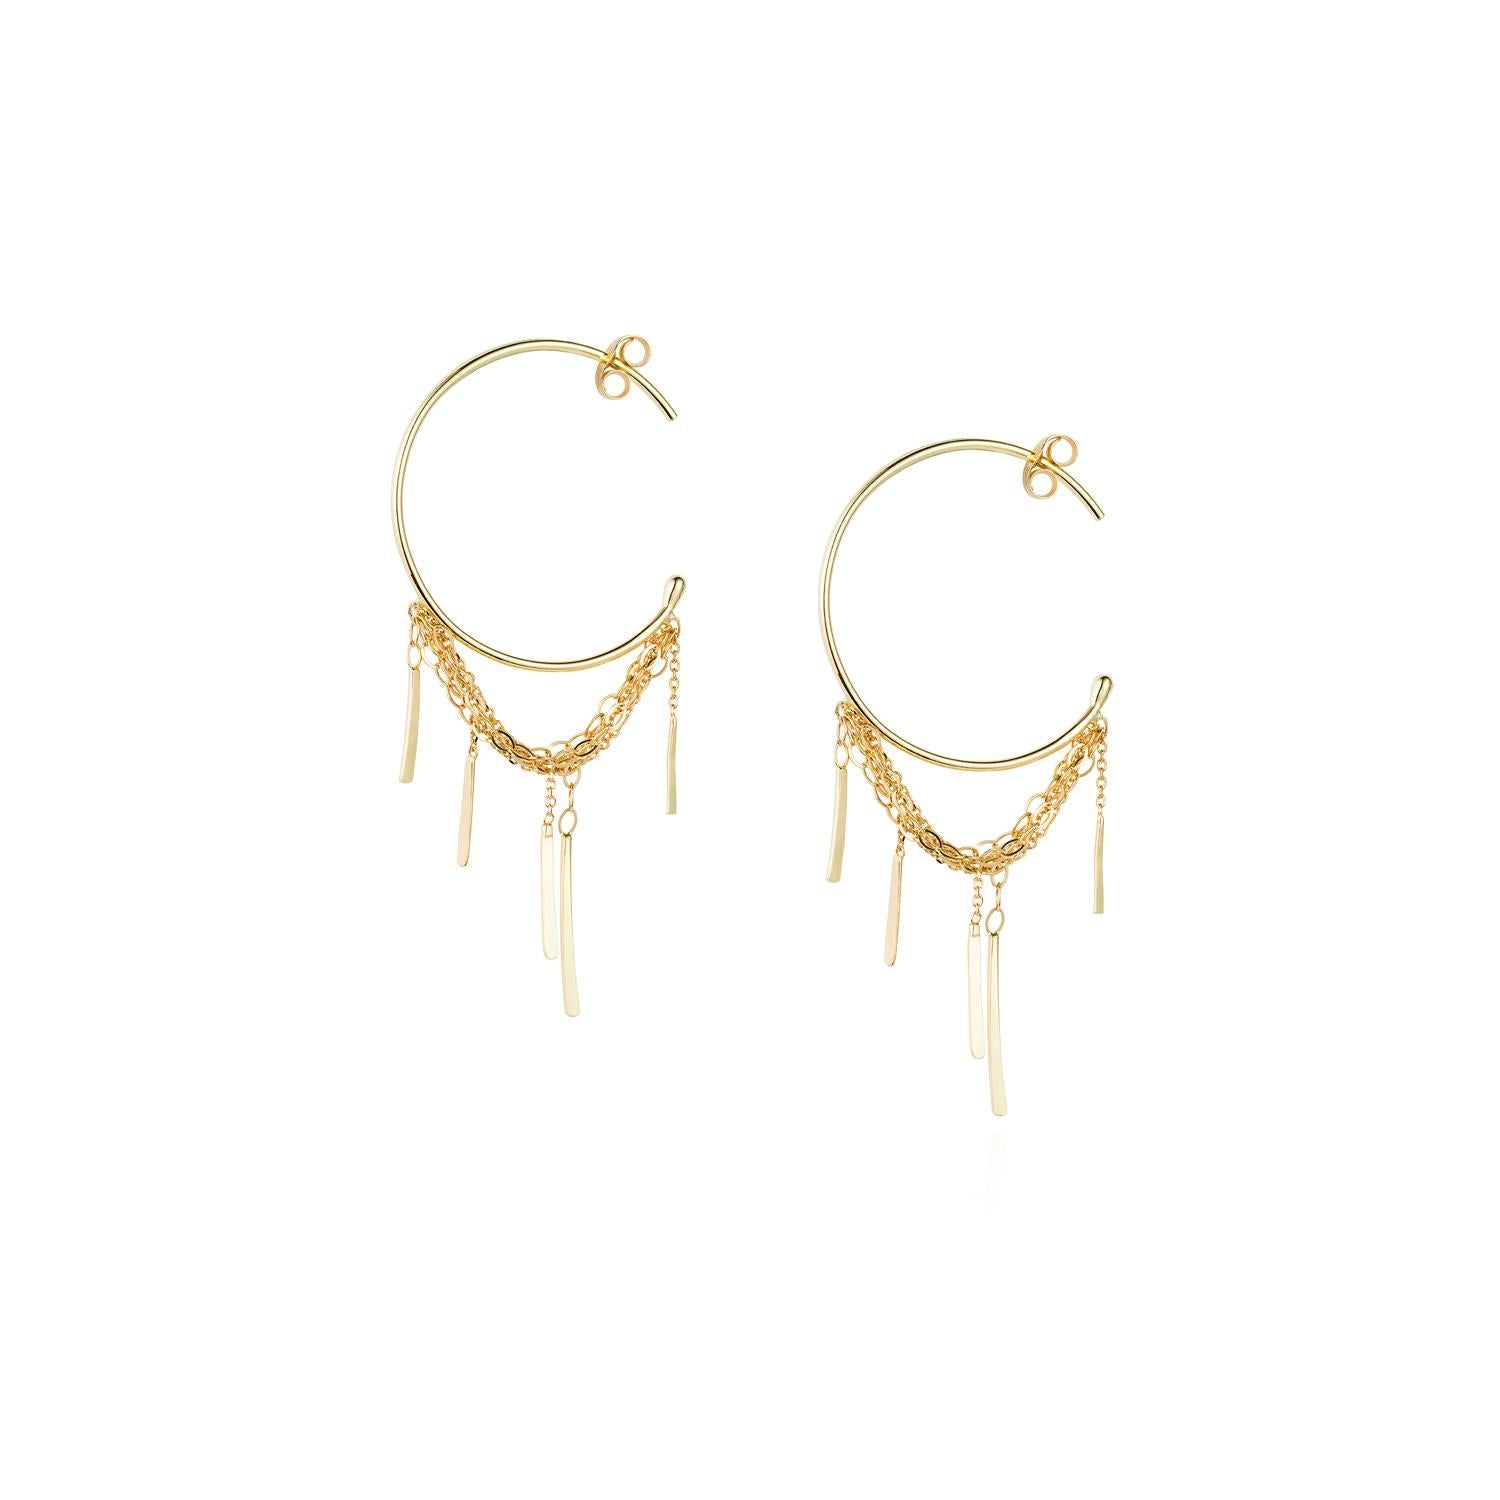 Sweet Pea Sycamore 18k Yellow Gold Medium Hoop Earrings With Chains and Bars For Sale